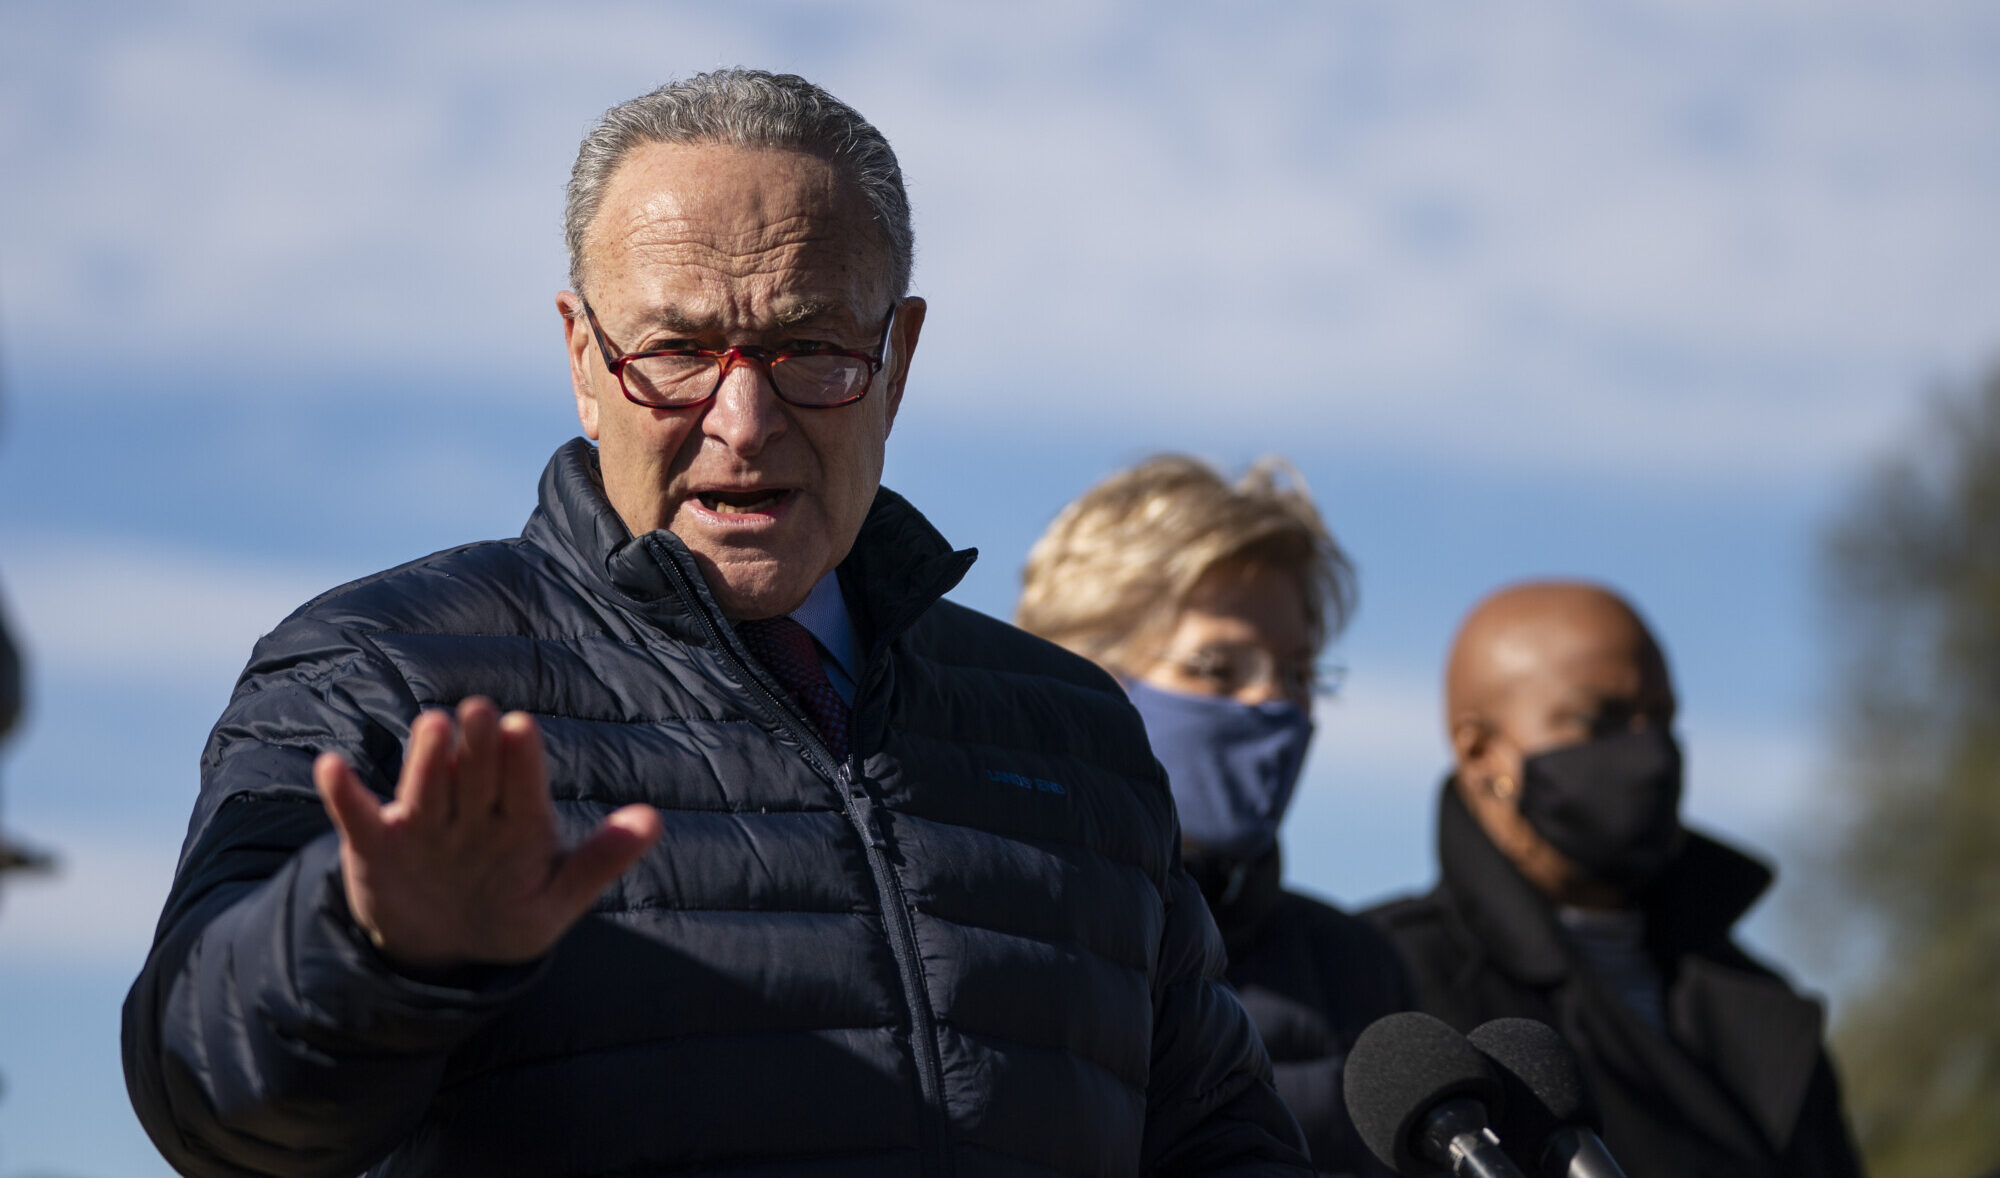 Schumer Announces Bipartisan Agreement on Rules, Time Frame for Impeachment Trial